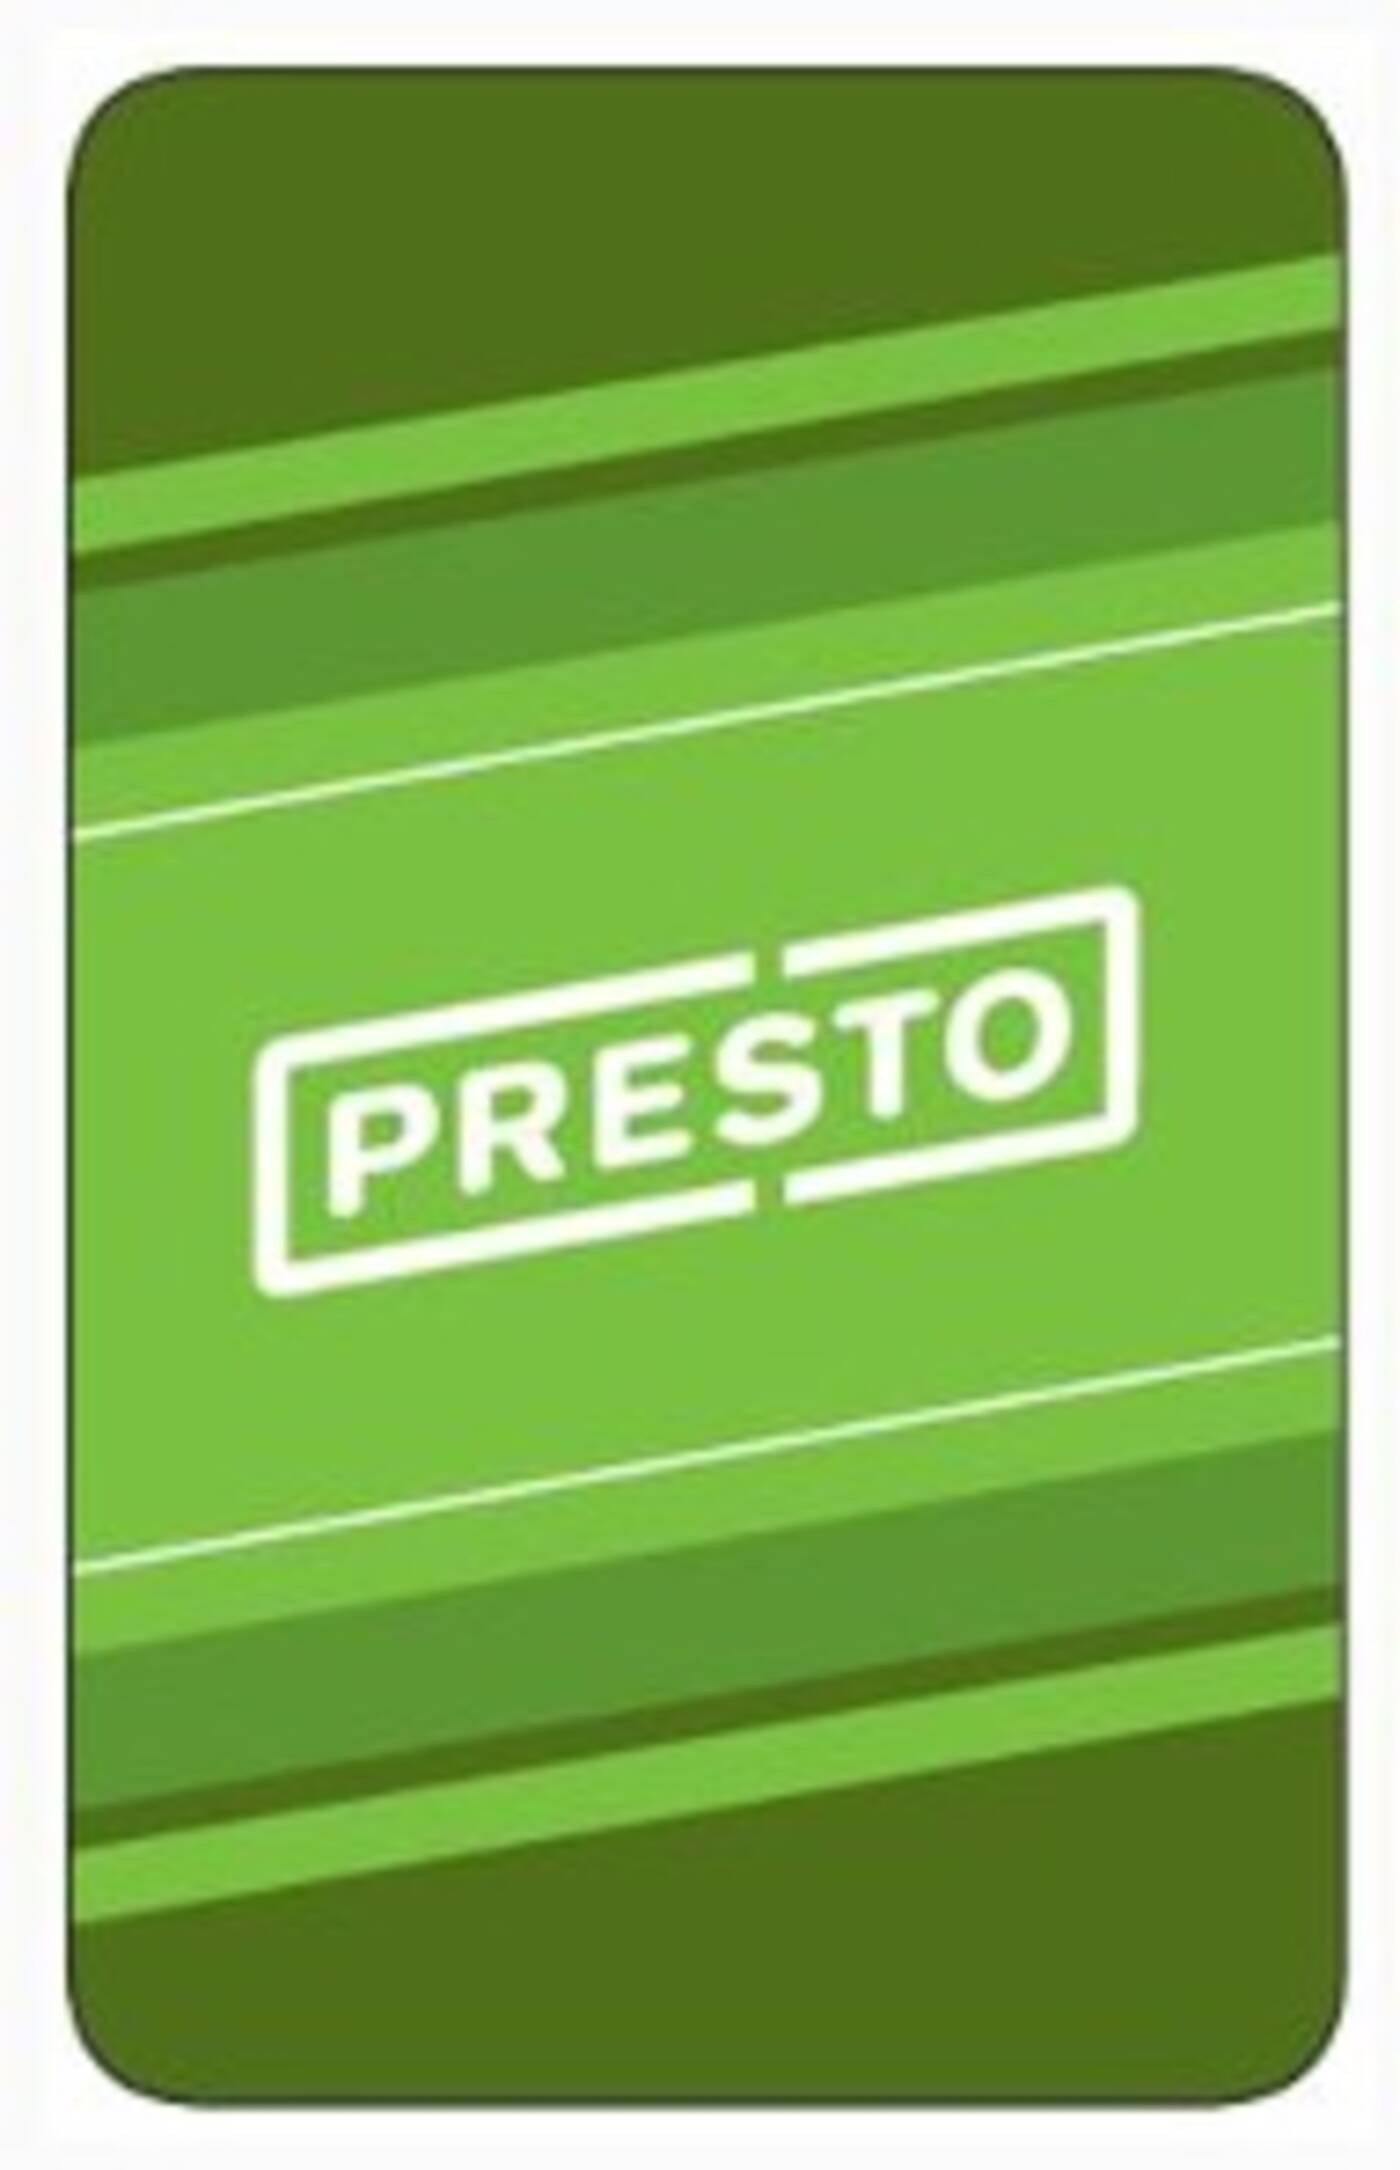 here-s-what-presto-cards-have-looked-like-in-toronto-over-the-years